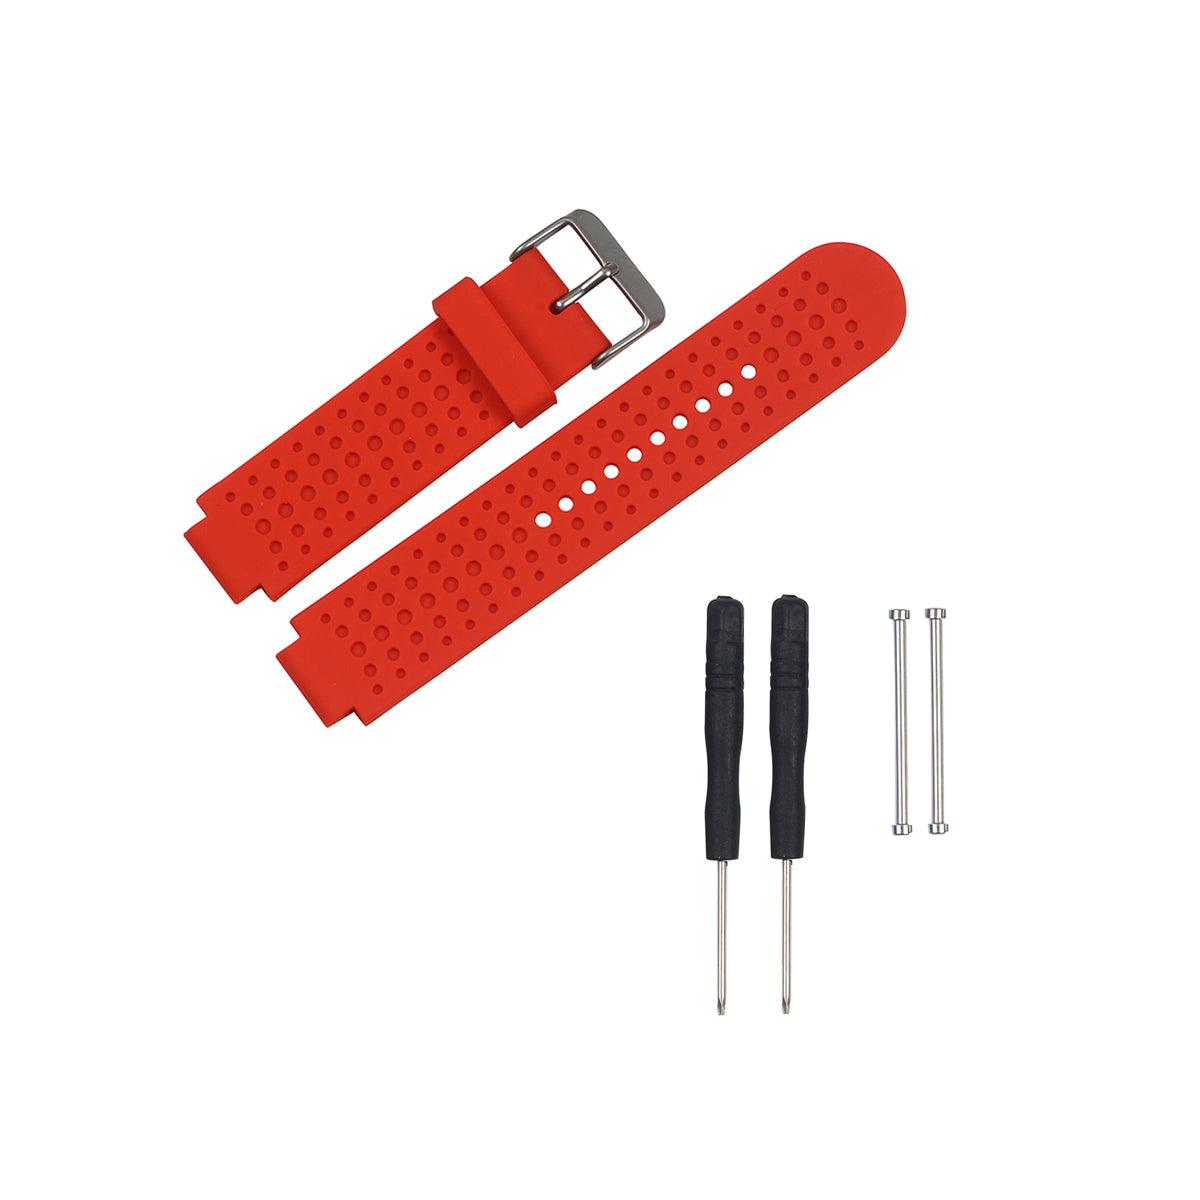 Garmin Forerunner 230/235/630/220/620/735 Replacement Bands Strap Kit Red  